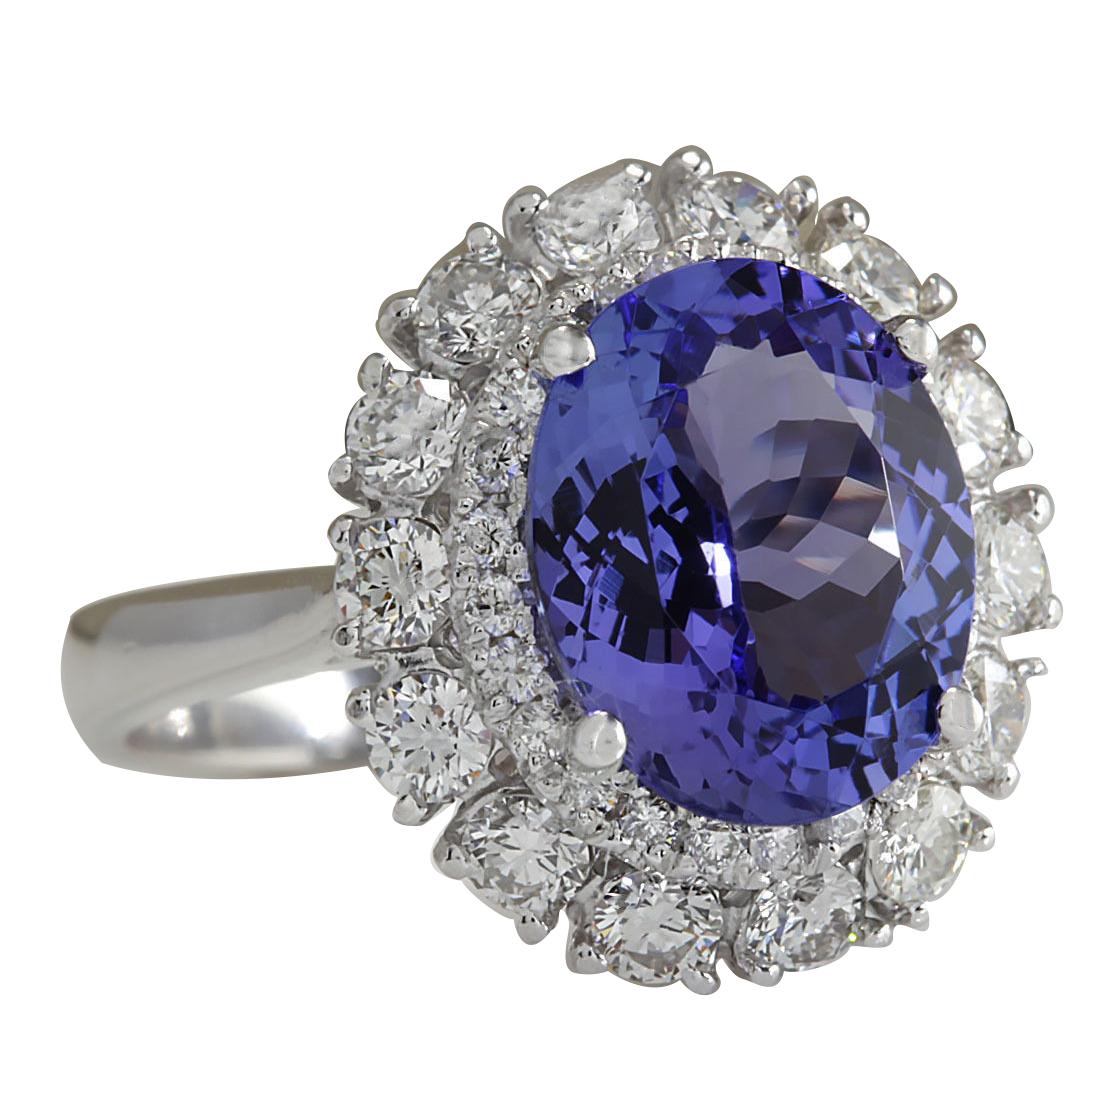 Stamped: 14K White Gold
Total Ring Weight: 5.1 Grams
Total Natural Tanzanite Weight is 3.62 Carat (Measures: 11.00x9.00 mm)
Color: Blue
Total Natural Diamond Weight is 1.26 Carat
Color: F-G, Clarity: VS2-SI1
Face Measures: 16.80x15.00 mm
Sku: